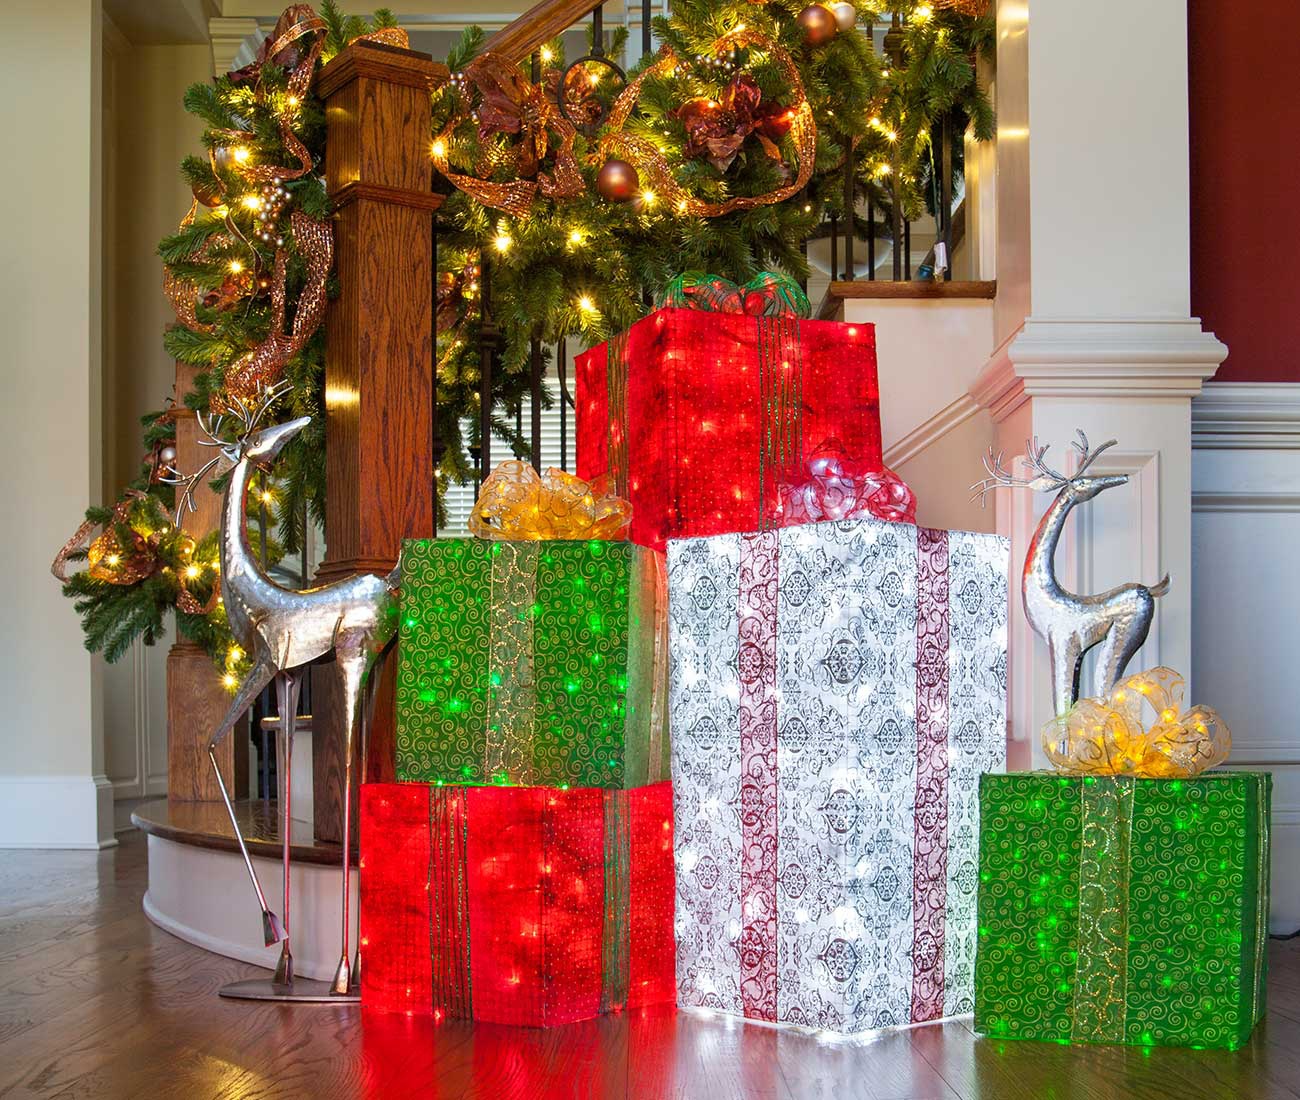 DIY Christmas Decorations - 4 Lighted Gift Boxes